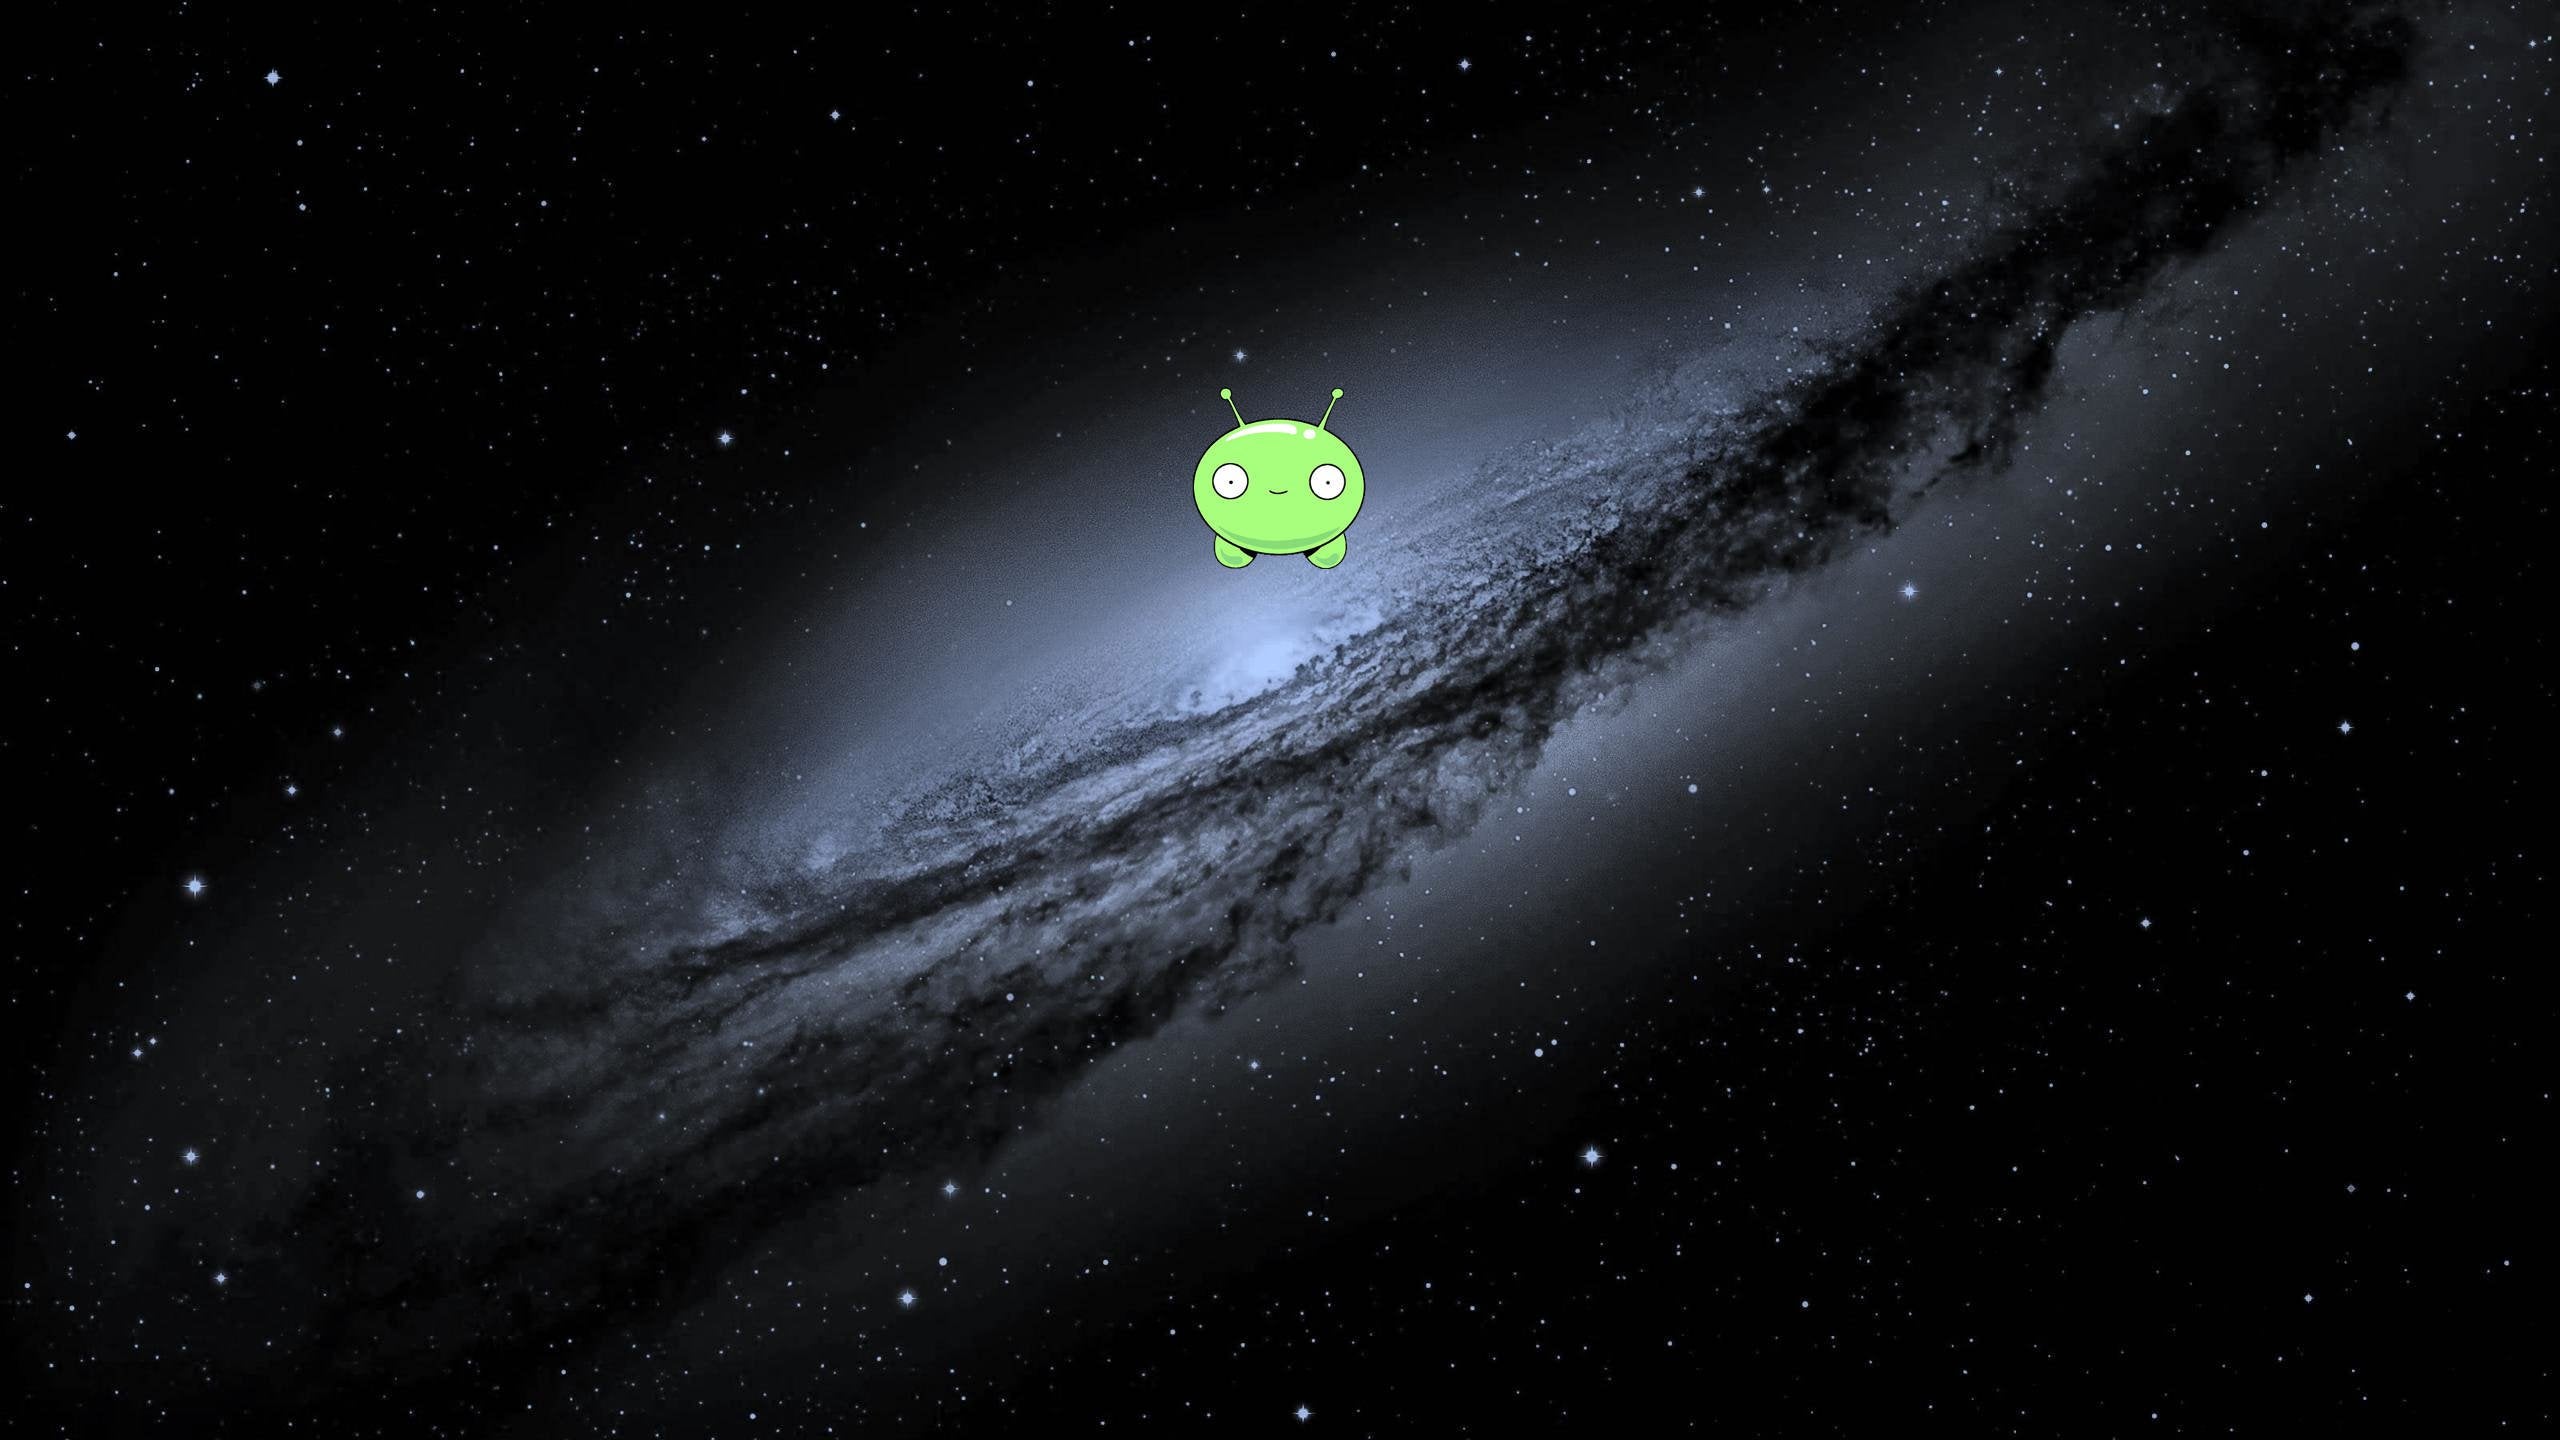 Slapped a Mooncake in a gorgeous 2560x1440 space wallpaper